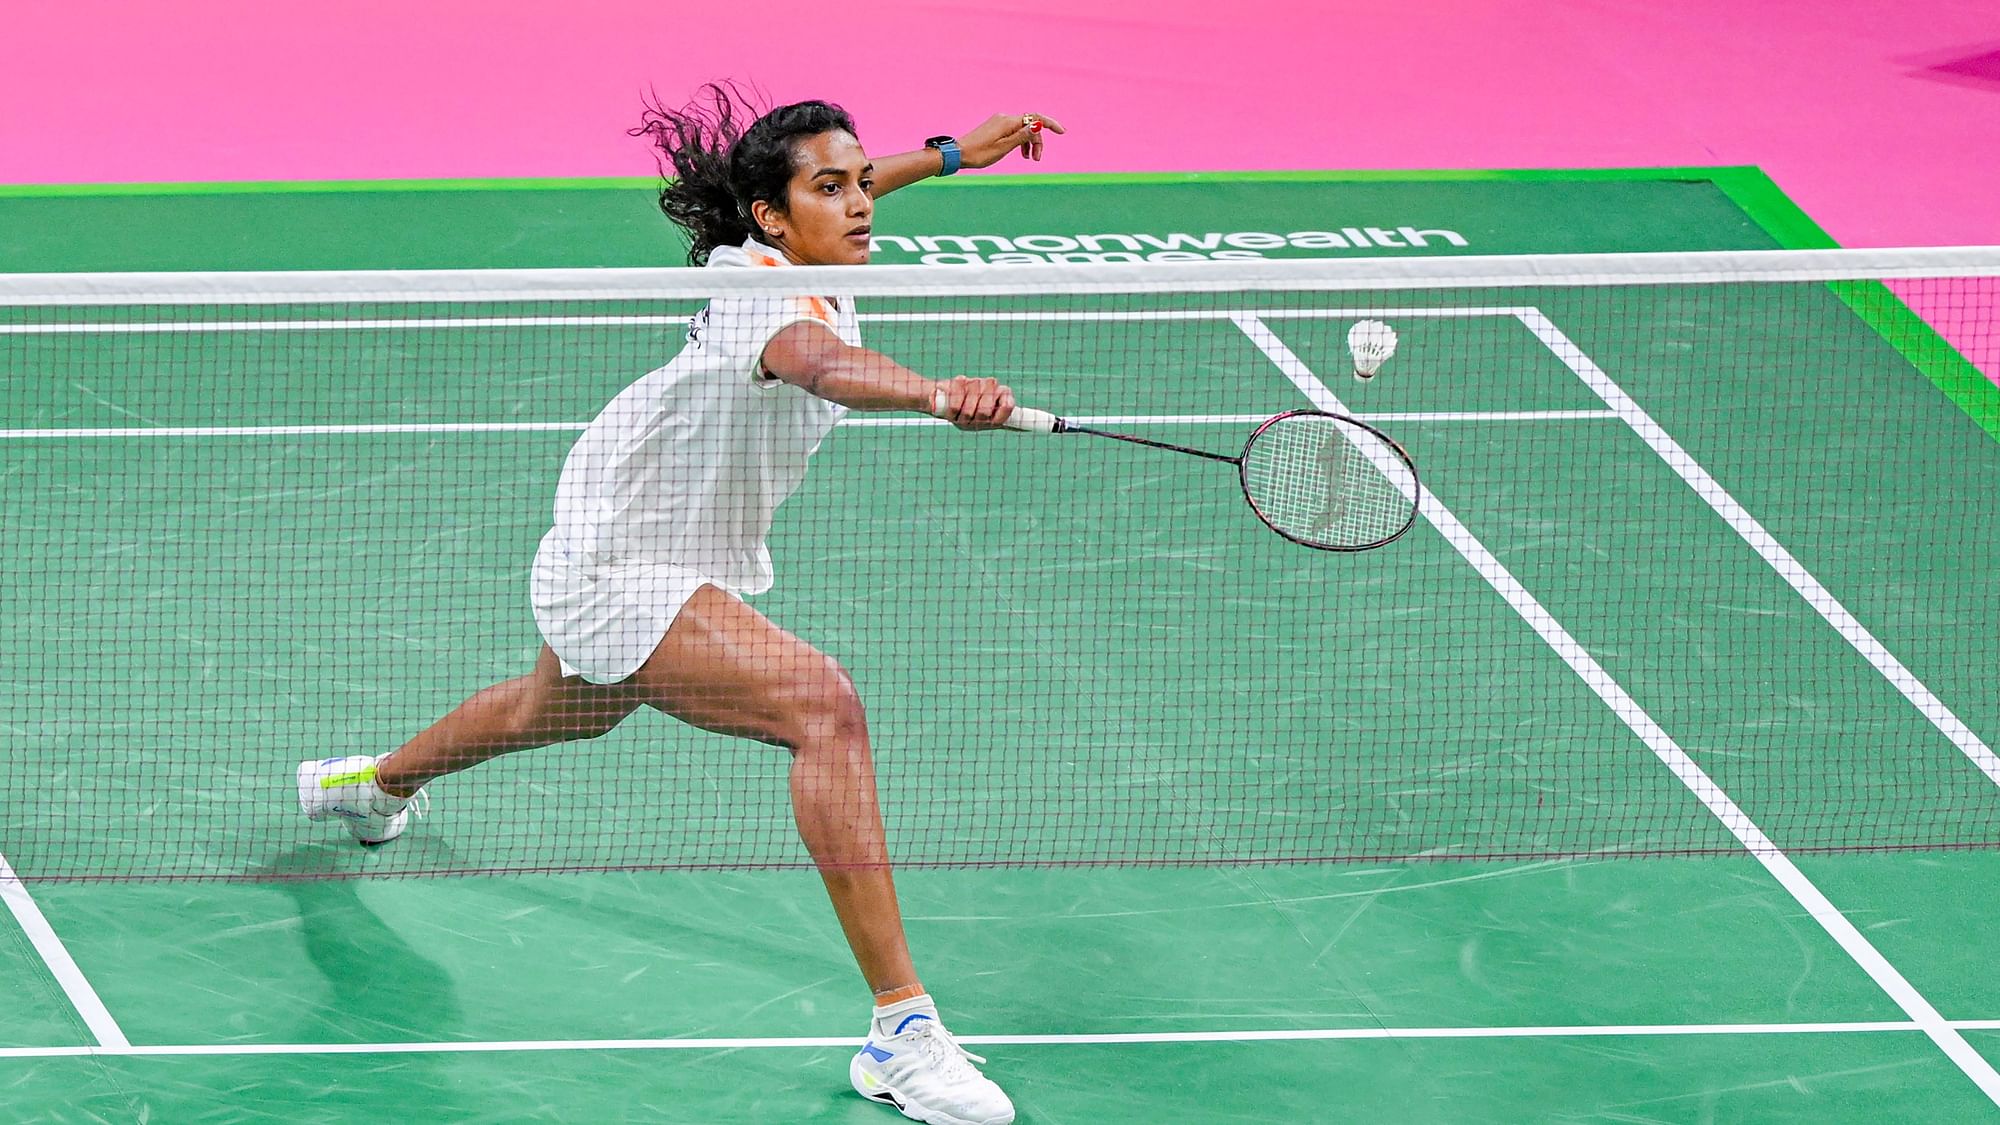 CWG Games 2022 PV Sindhu Shifts Focus To Individual Event After Defeat in Mixed Team Final at Commonwealth Games 2022 Birmingham.